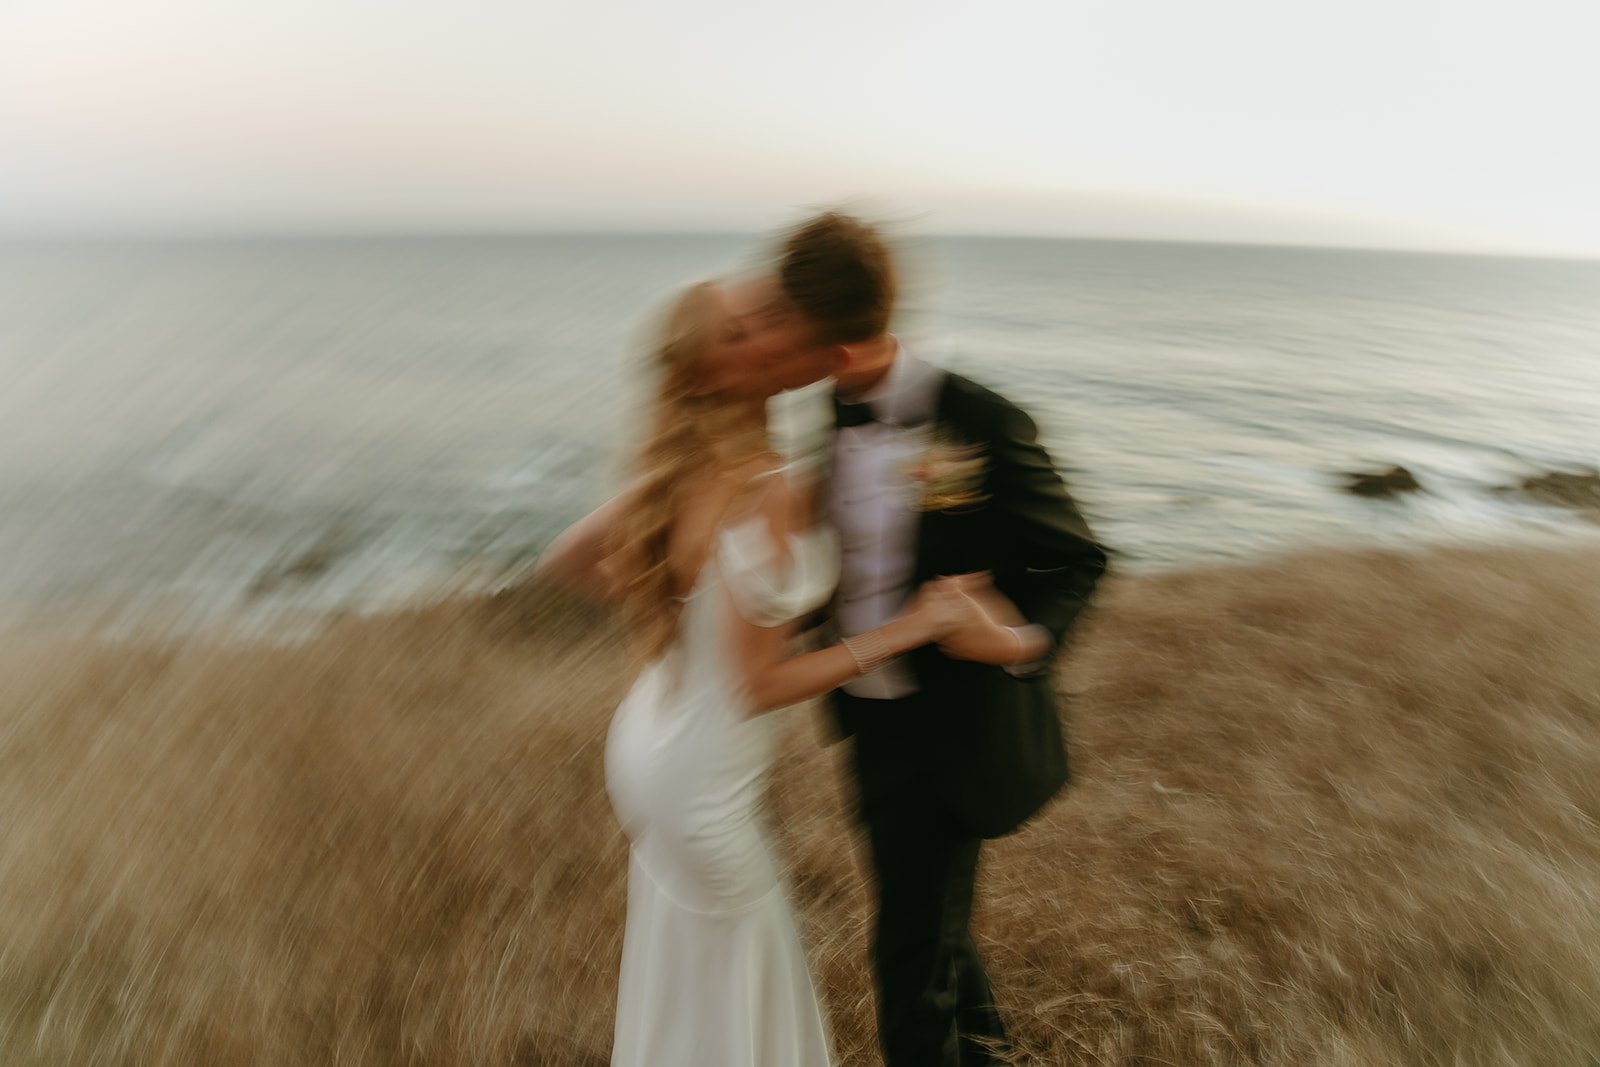 Bride and groom dancing on the coast during sunset